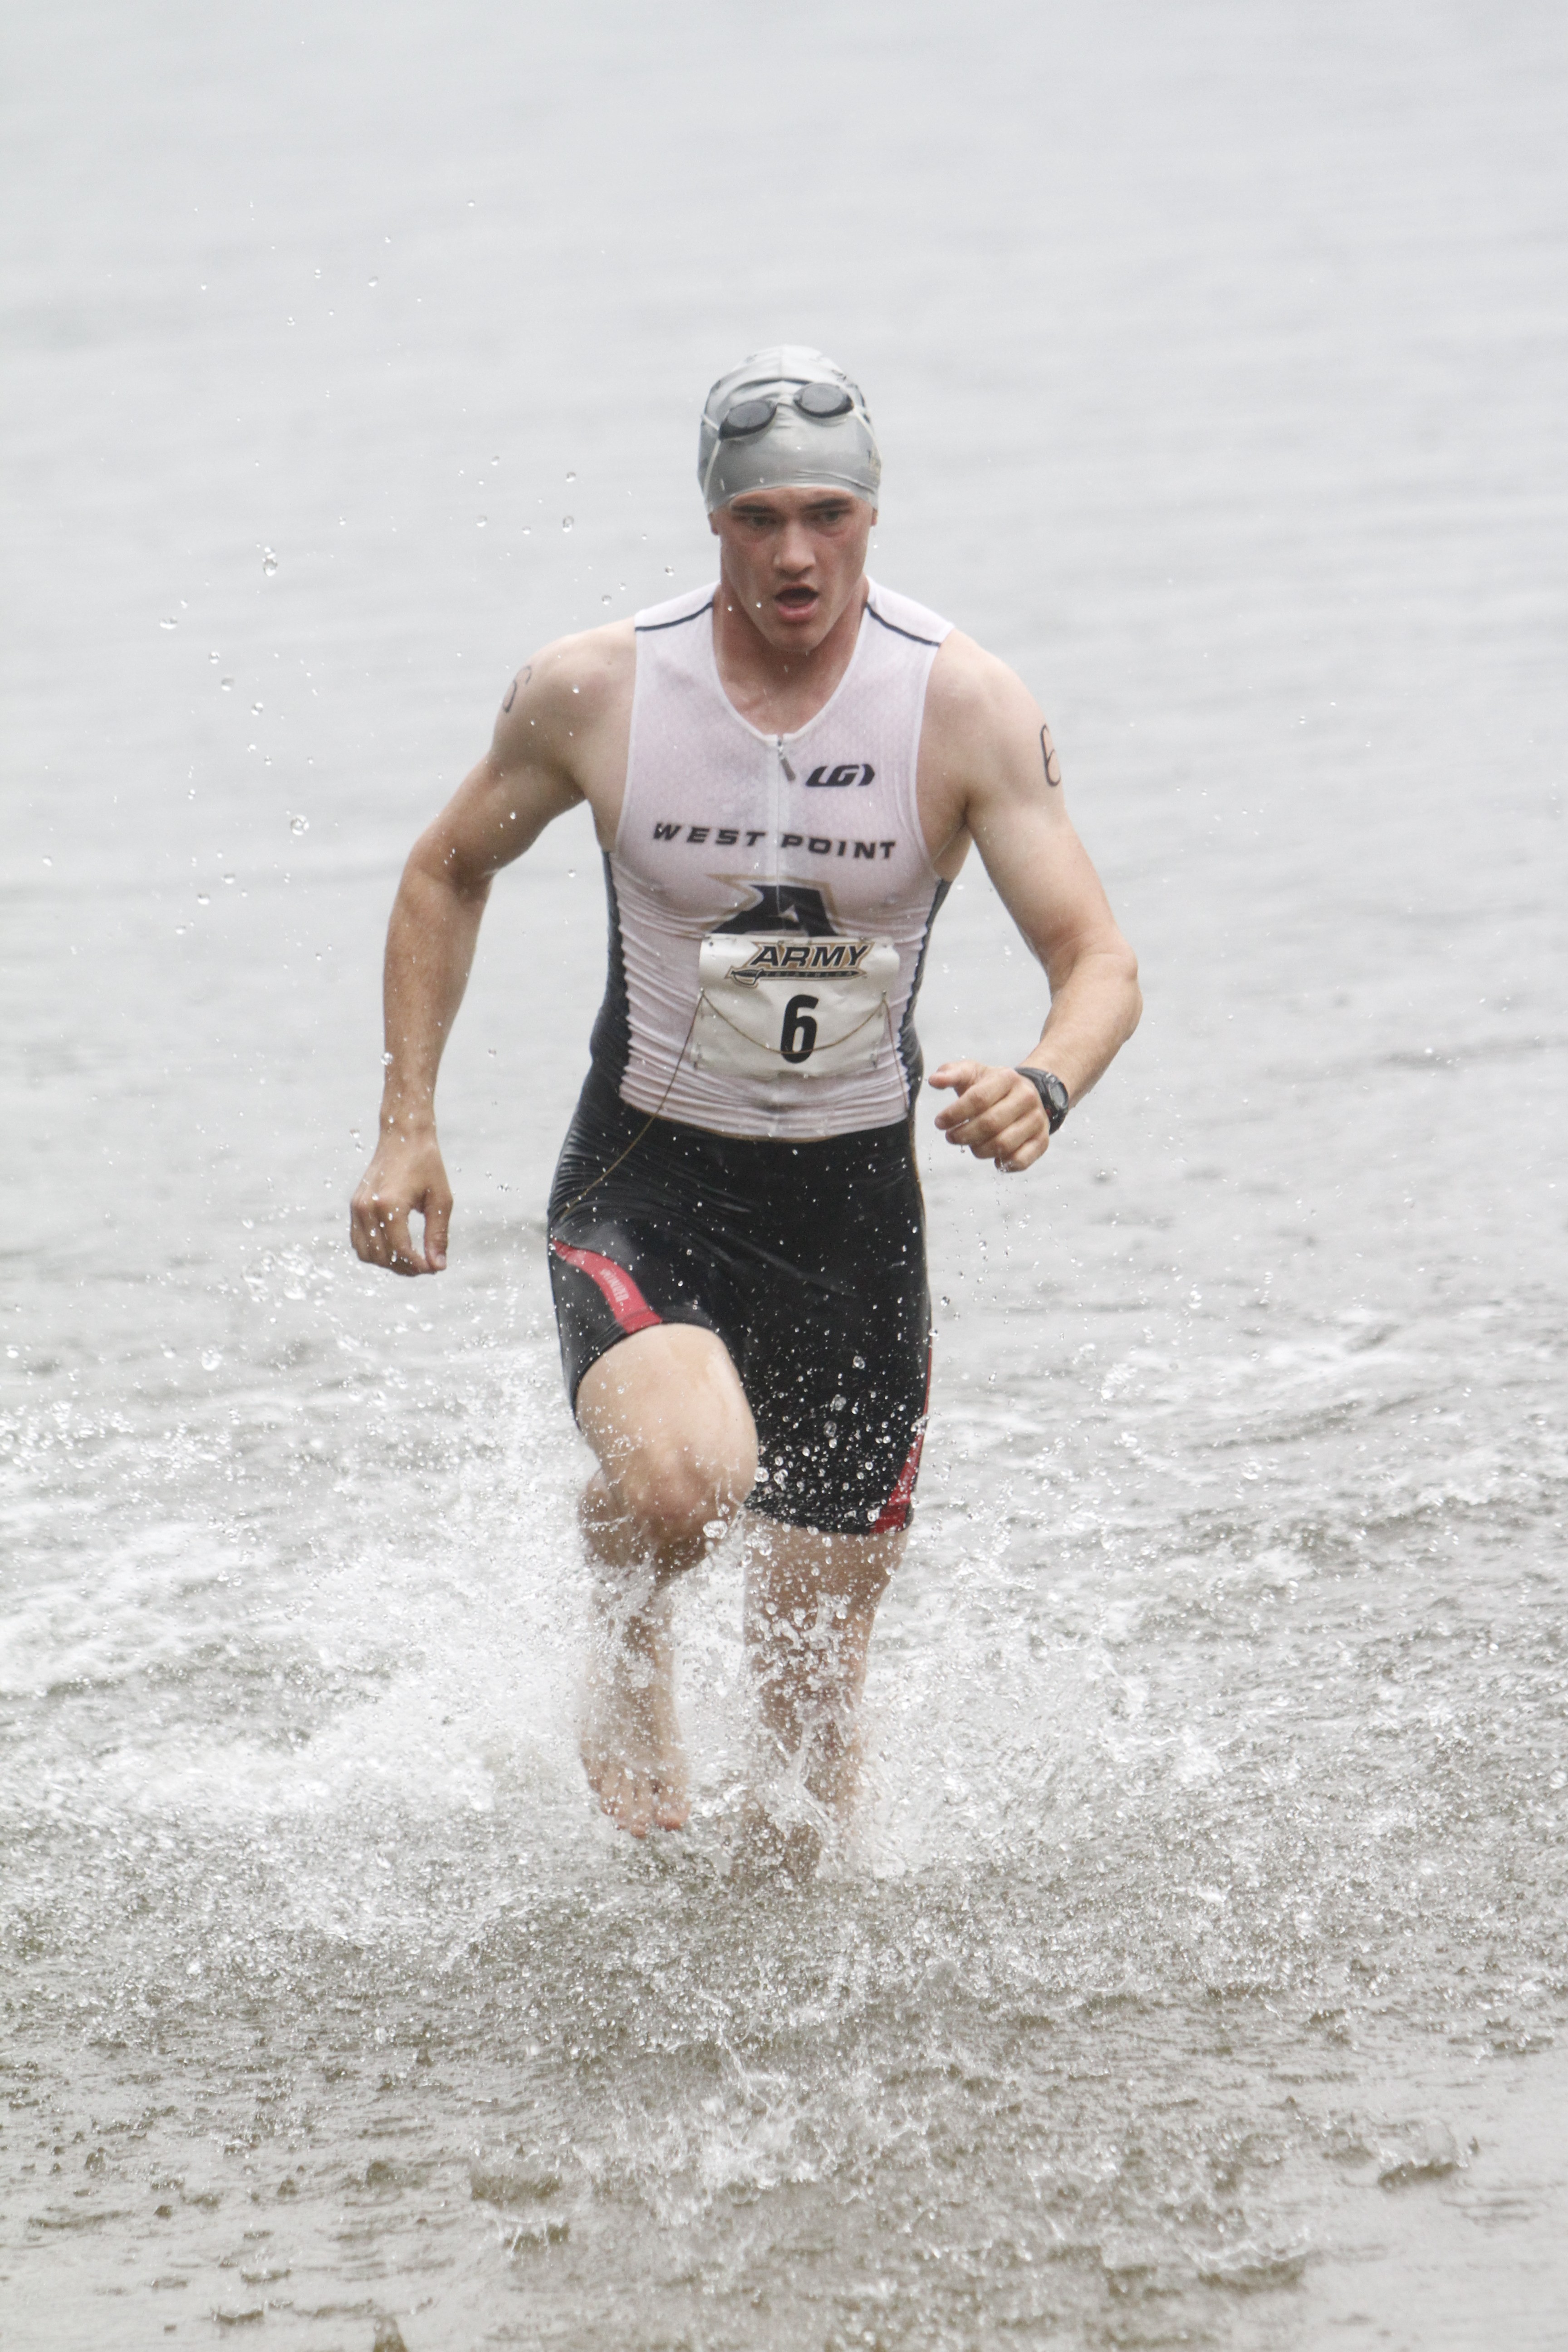 Cadets compete in annual West Point Triathlon Article The United